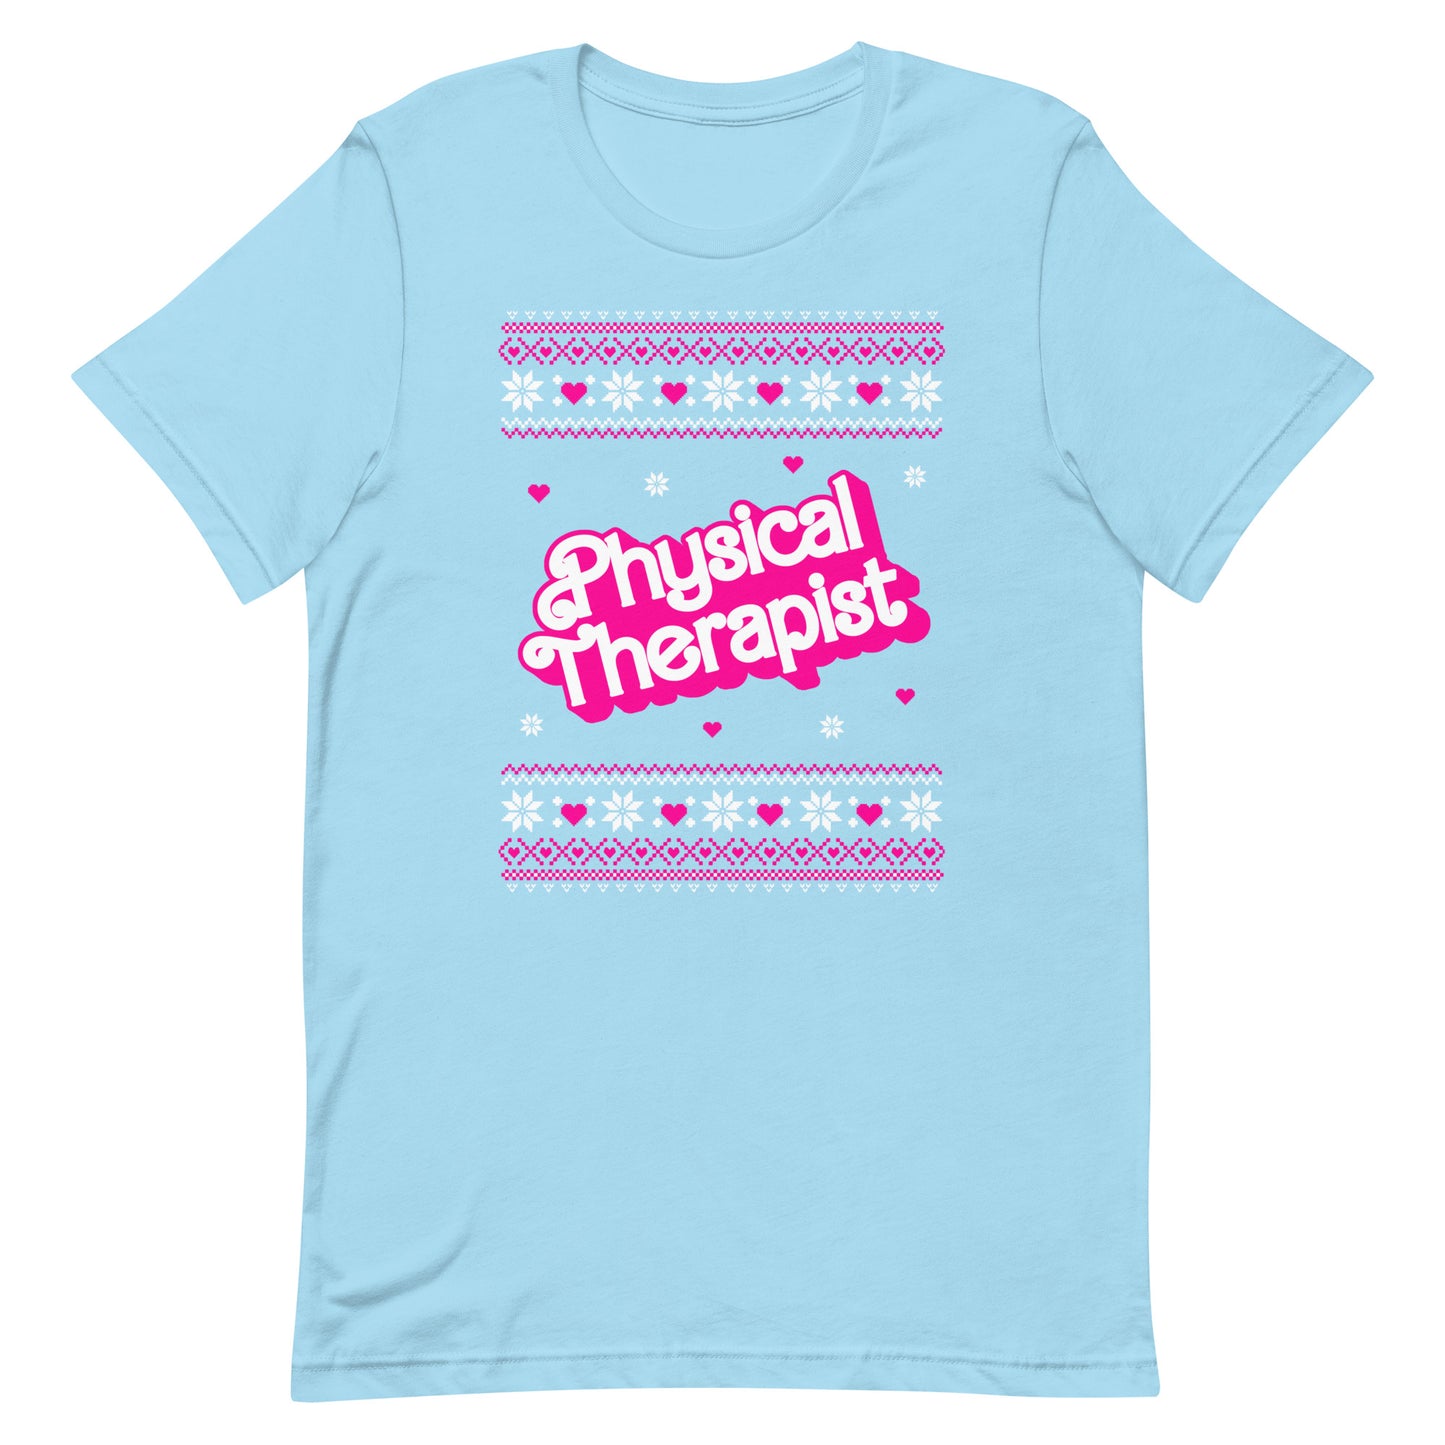 Barbie Physical Therapist Christmas T-shirt